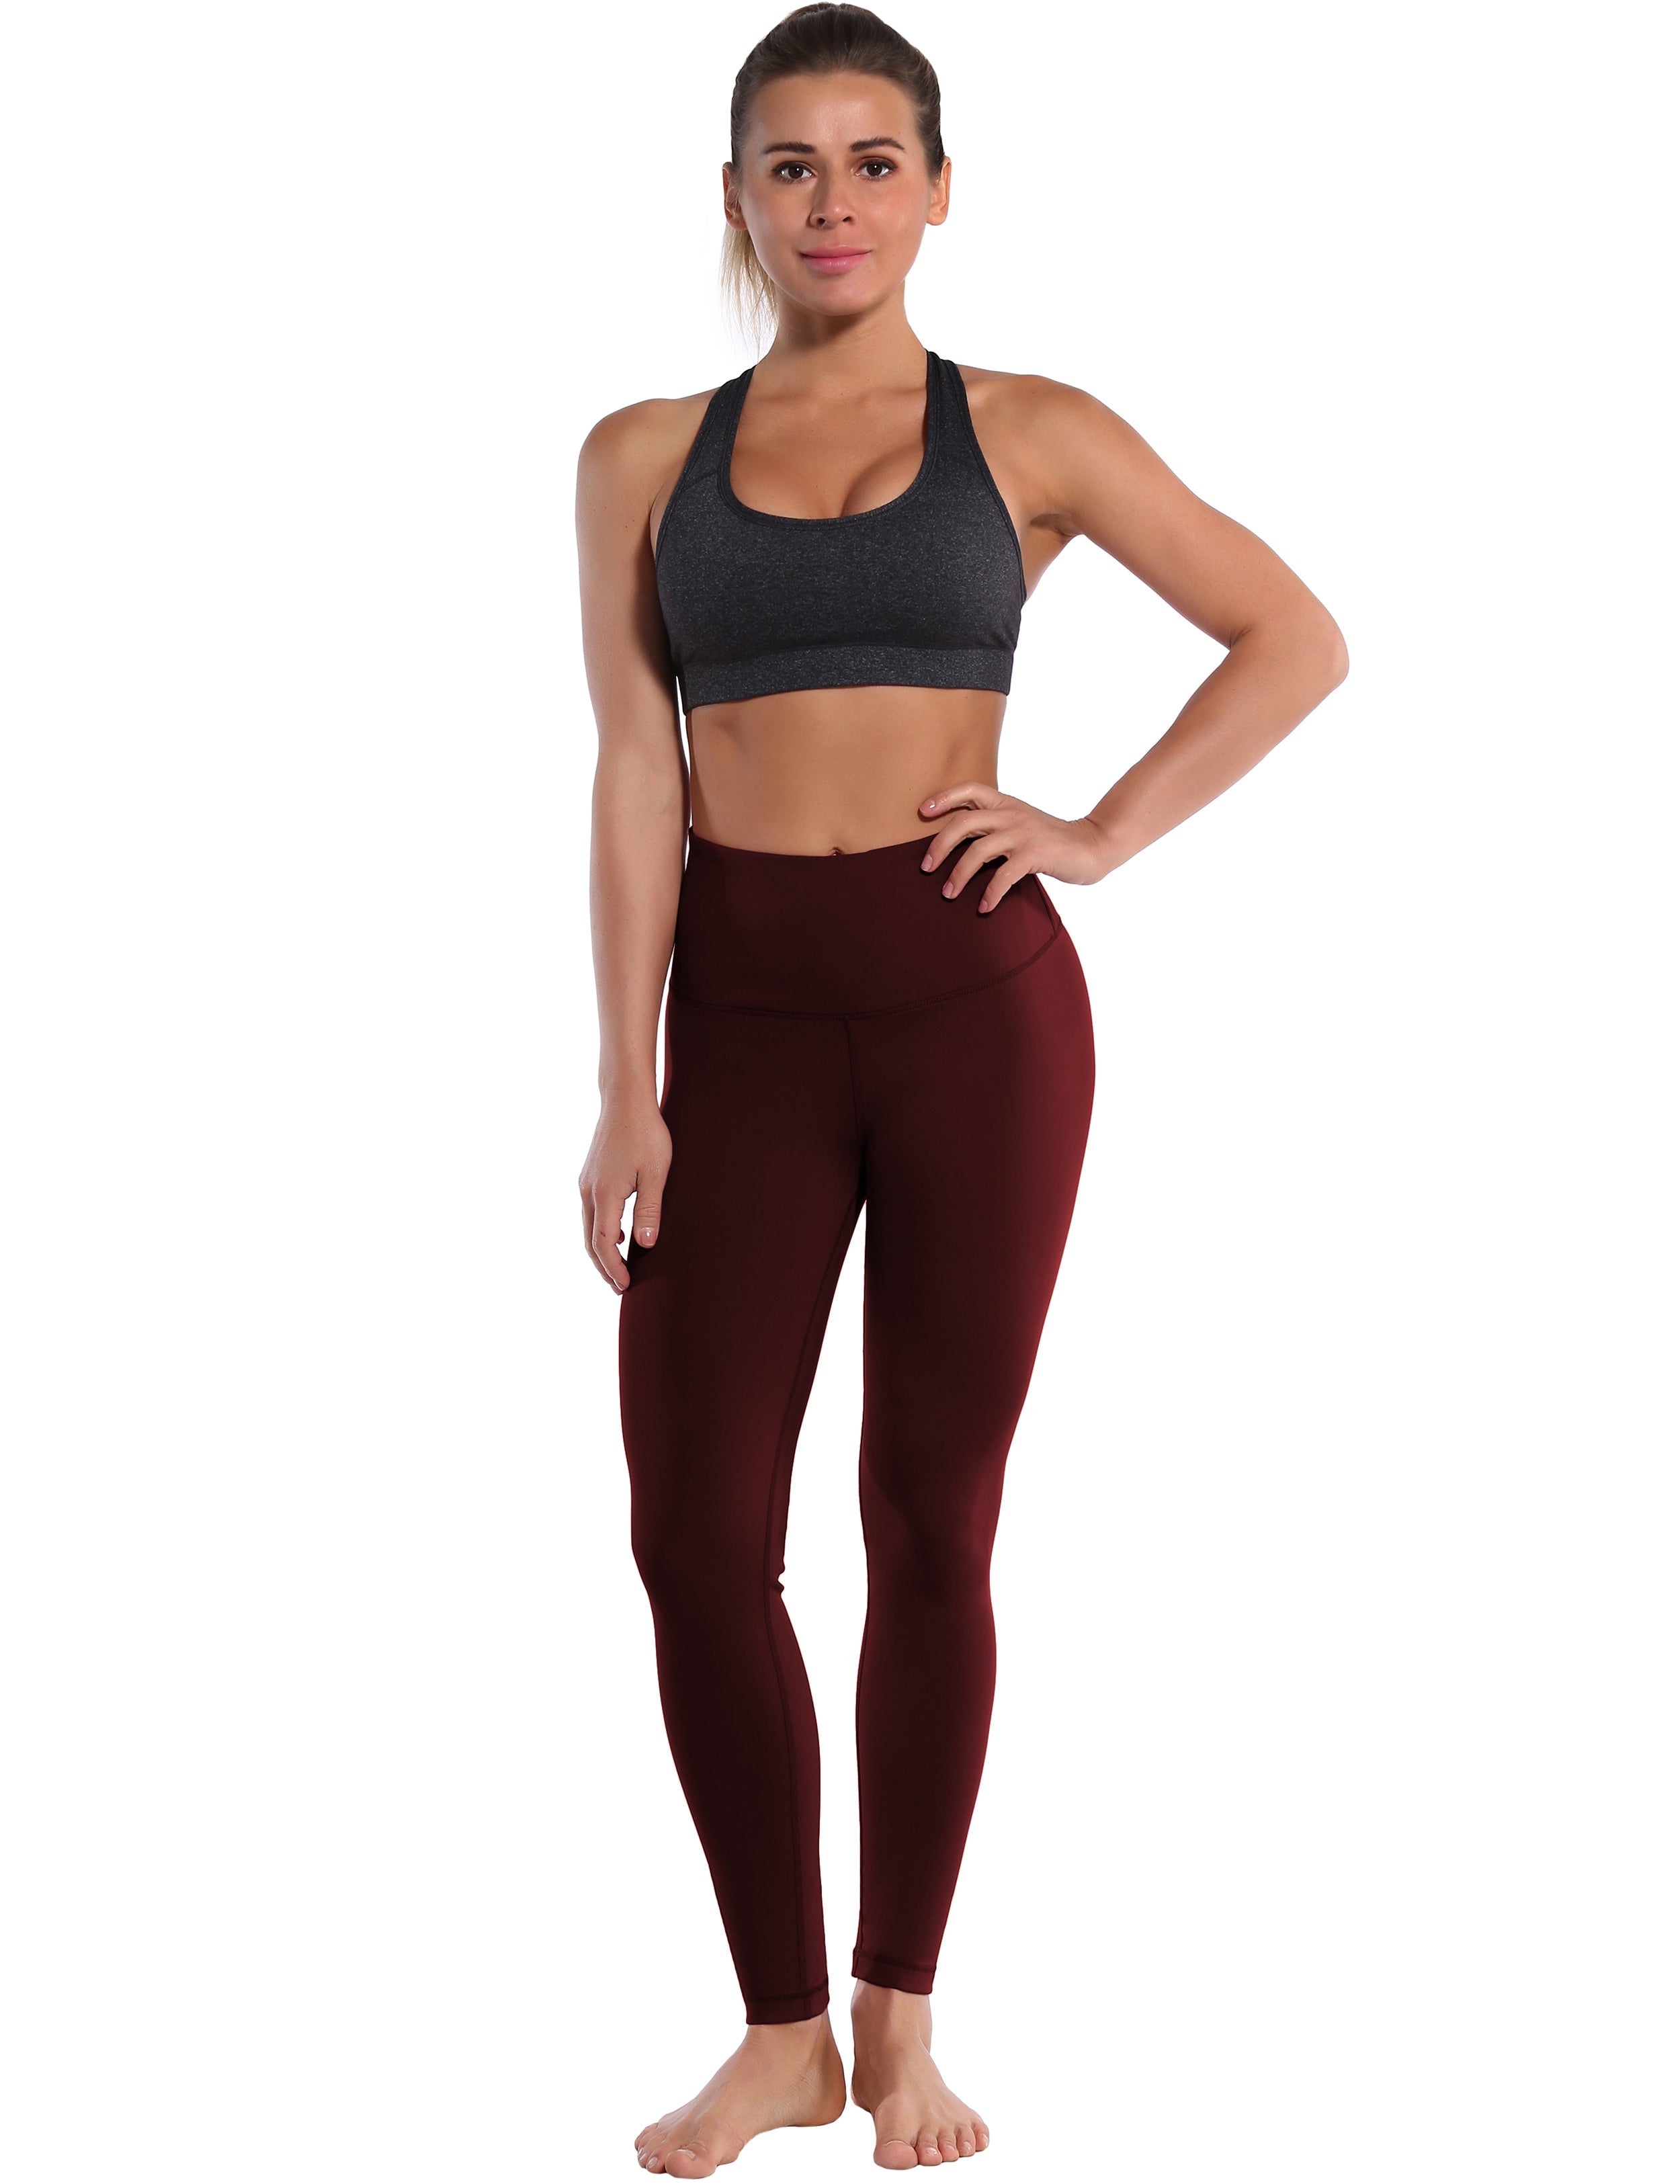 High Waist Golf Pants cherryred 75%Nylon/25%Spandex Fabric doesn't attract lint easily 4-way stretch No see-through Moisture-wicking Tummy control Inner pocket Four lengths